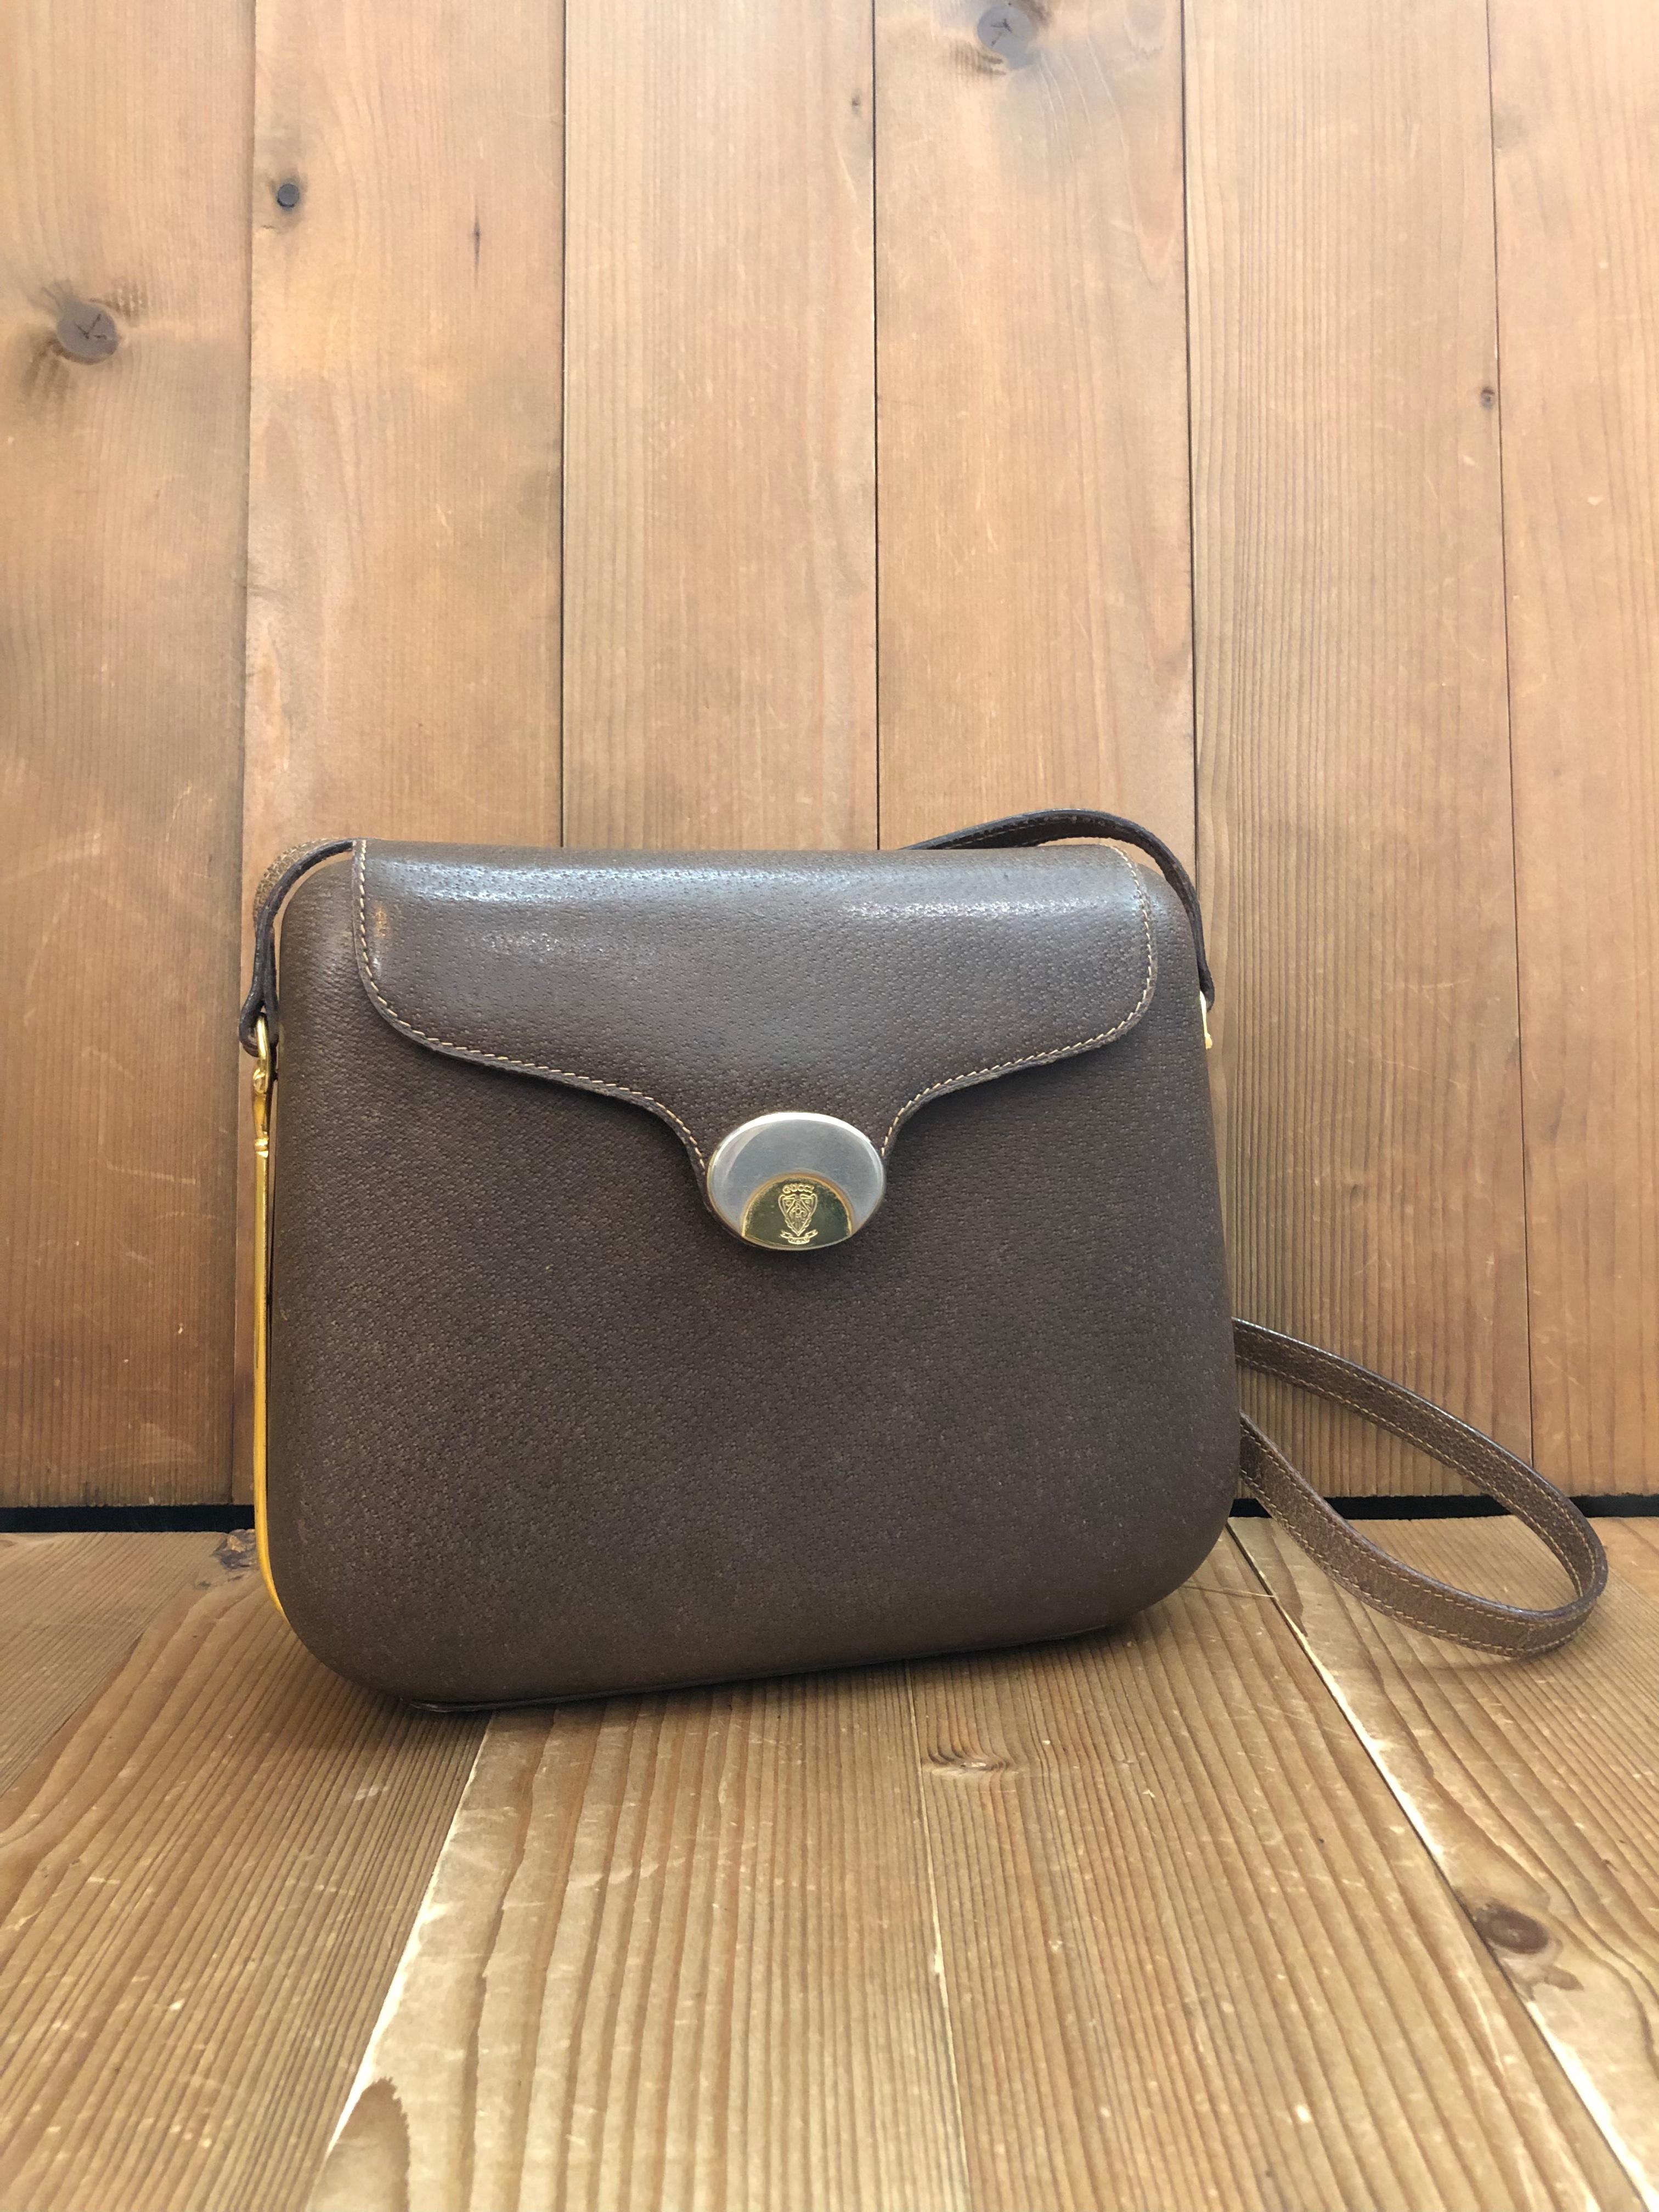 This rare vintage GUCCI hard-shell crossbody bag is crafted of pigskin leather in brown featuring a beautifully structured body with gold/silver toned hardware. Front magnetic snap closure opens to a beige leather interior featuring a patch pocket.